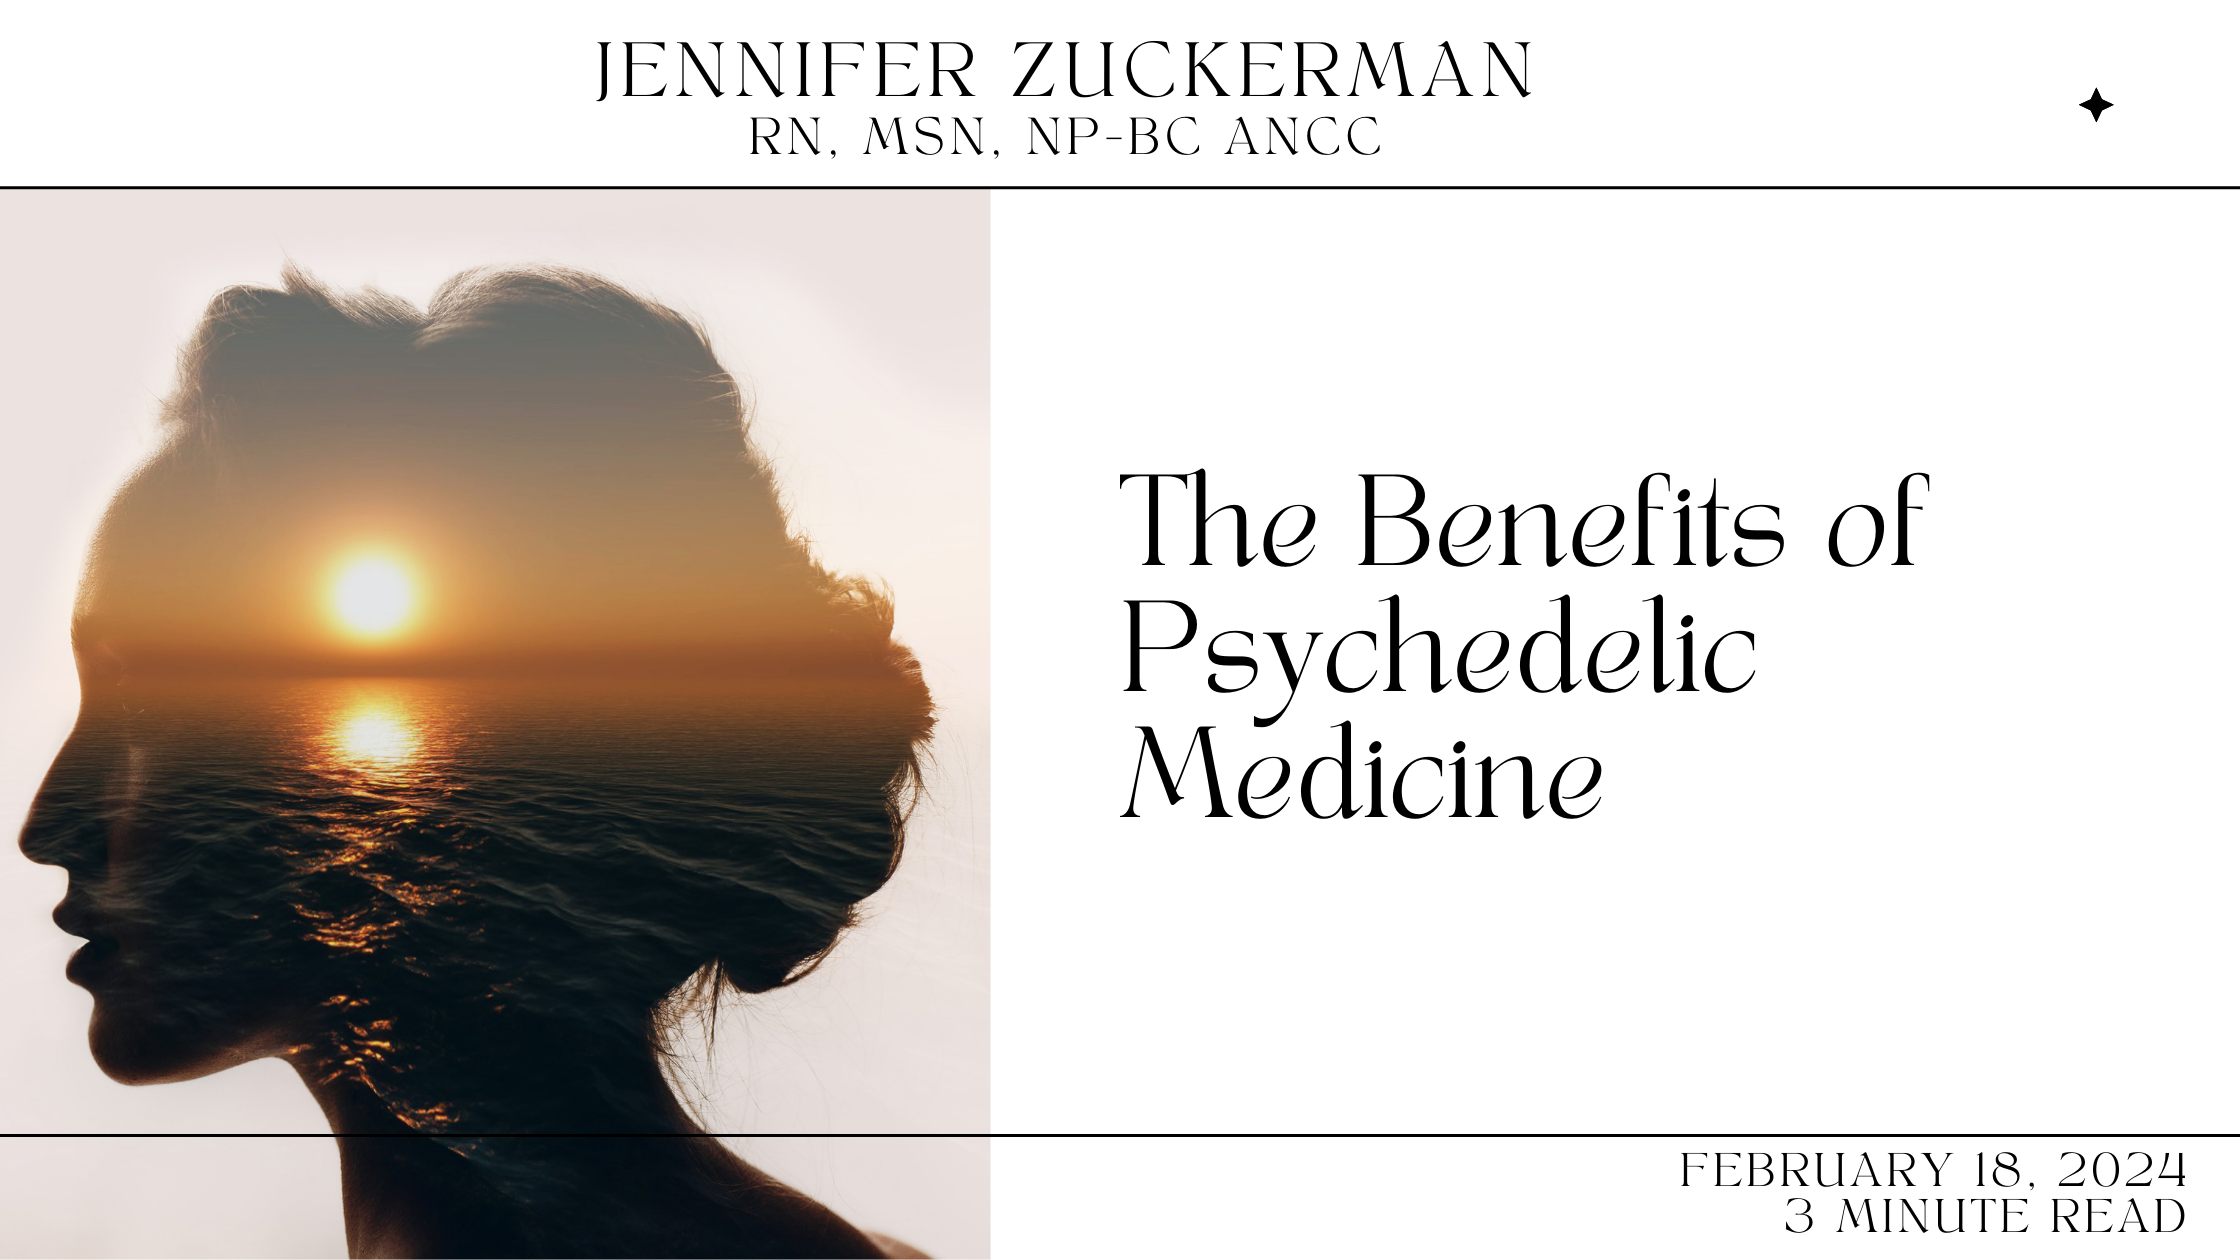 The Benefits of Psychedelic Medicine